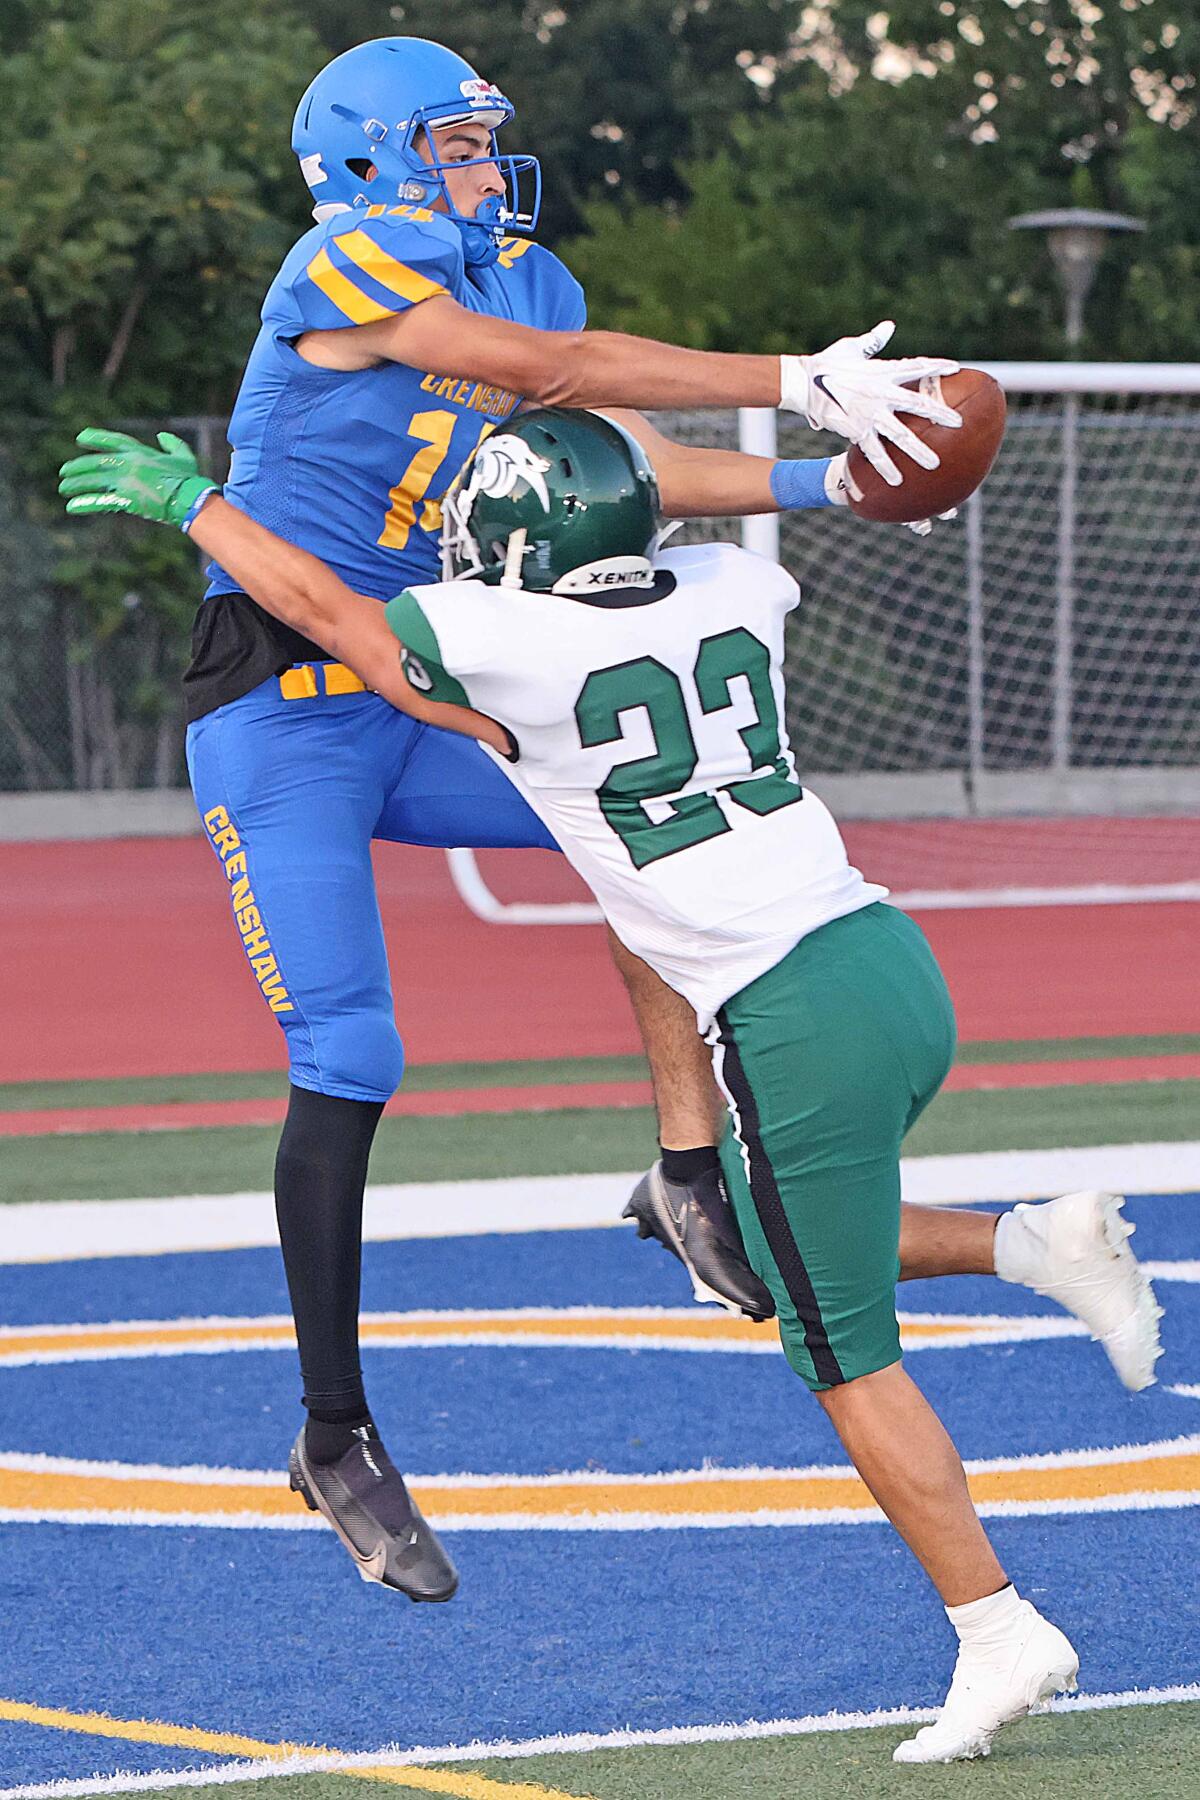 Roberto Salazar is a three-sport athlete for Crenshaw trying to make catch in football game.